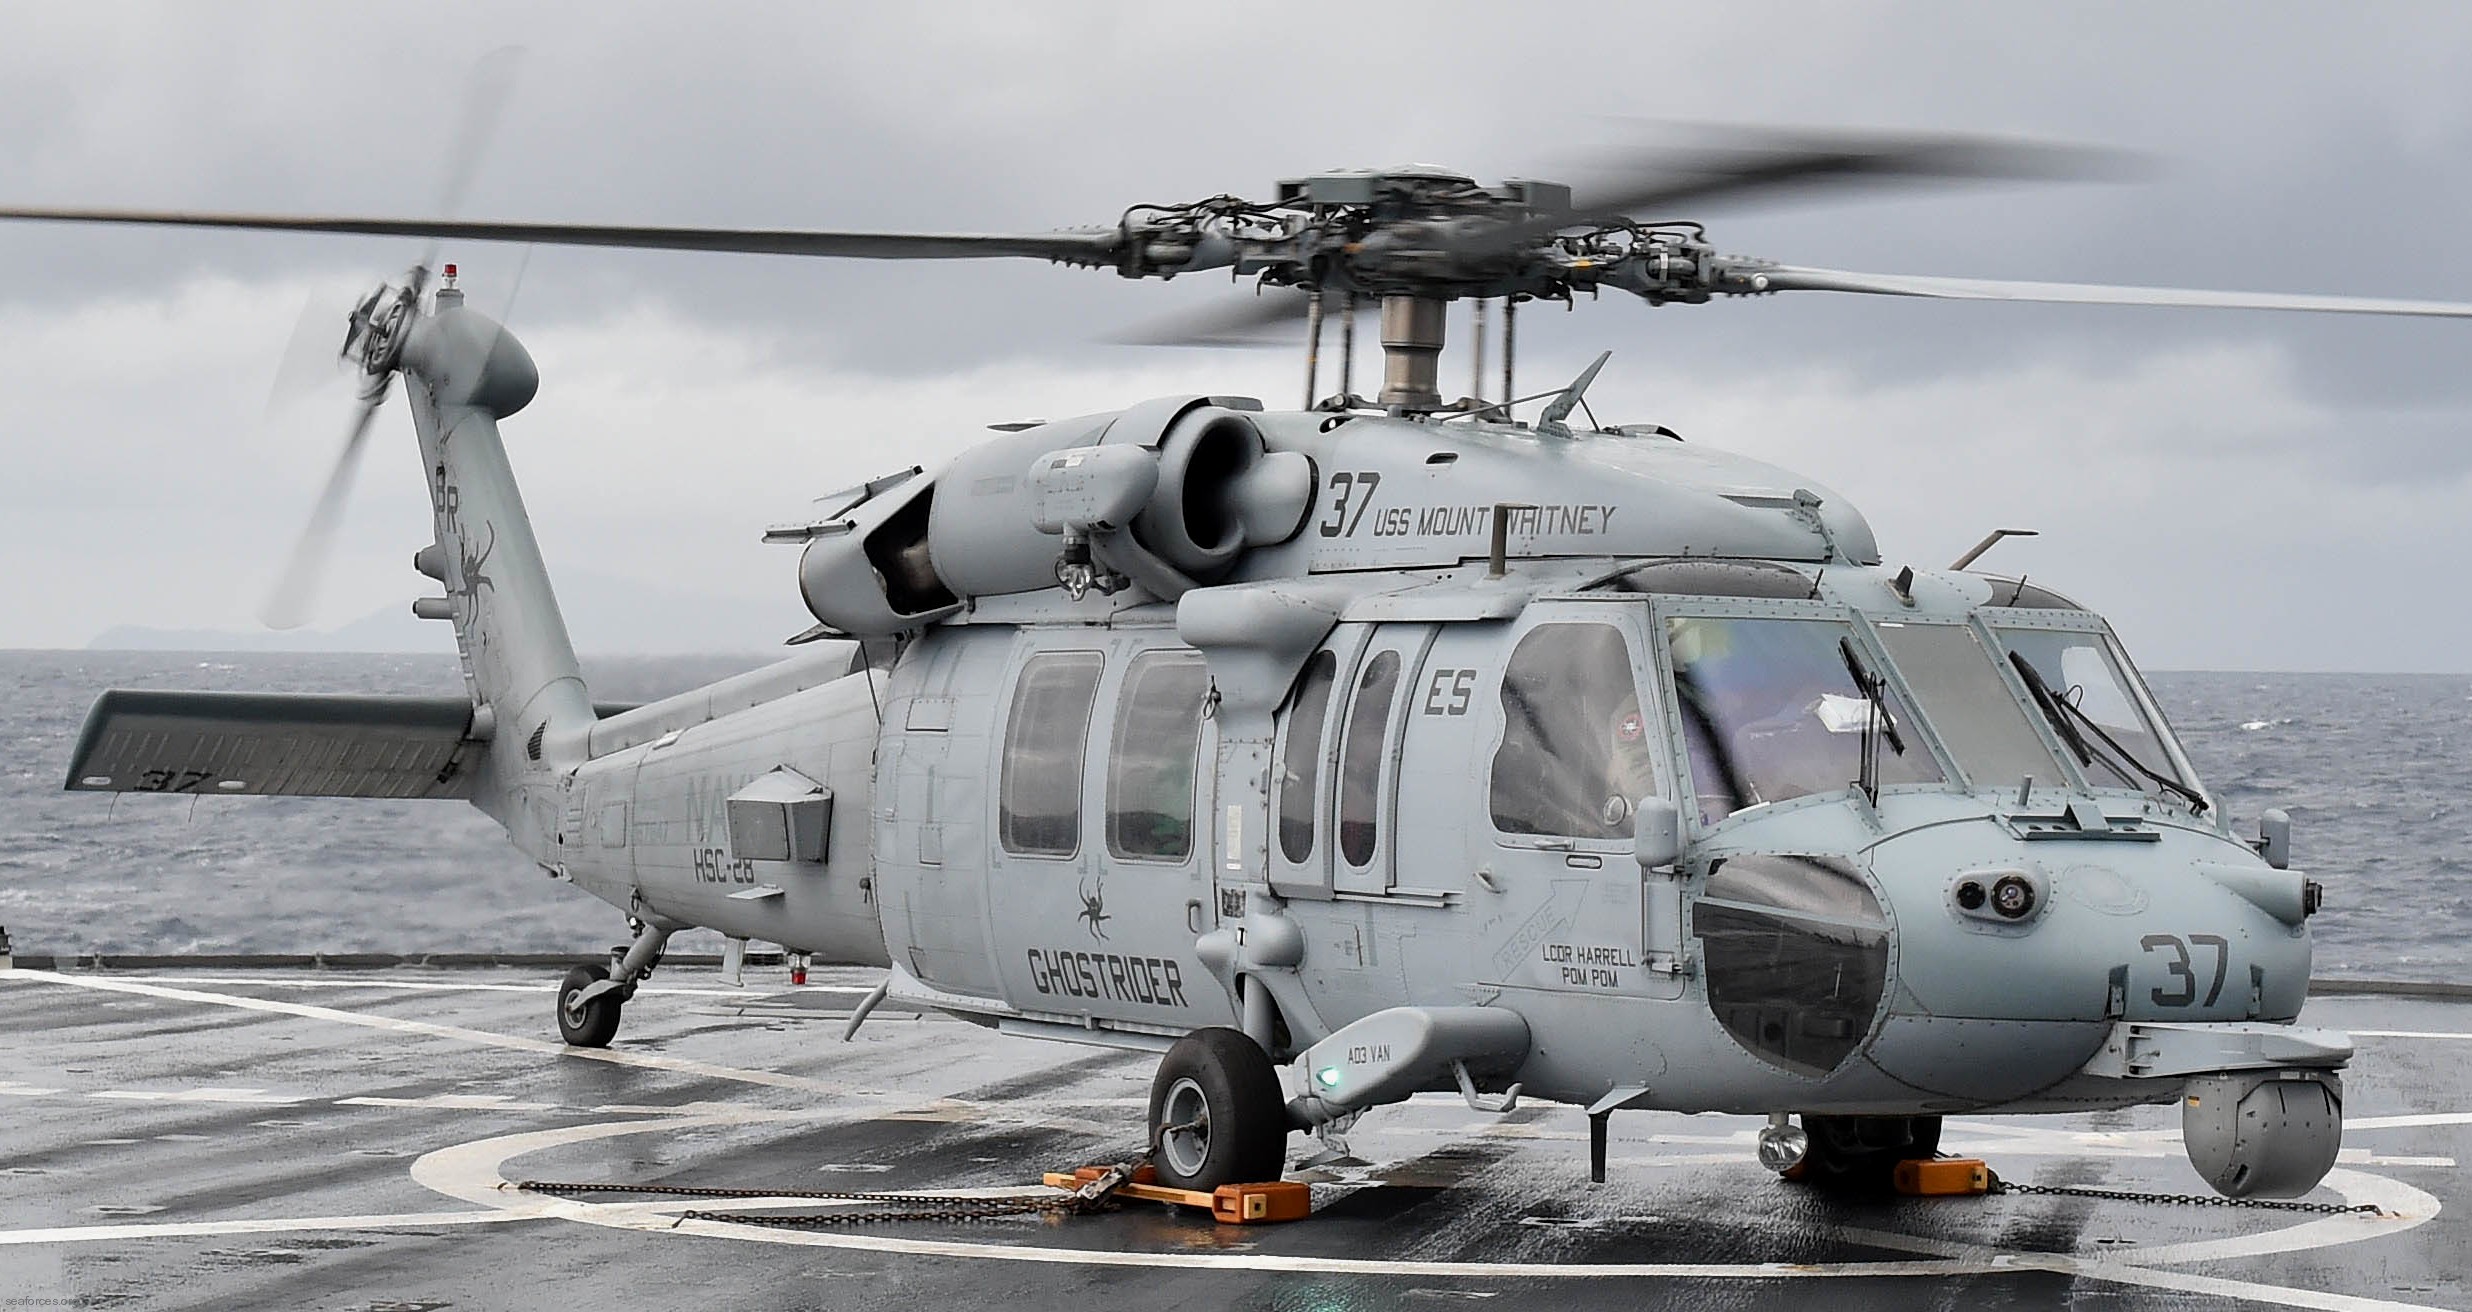 hsc-28 dragon whales helicopter sea combat squadron mh-60s seahawk us navy 176 uss mount whitney